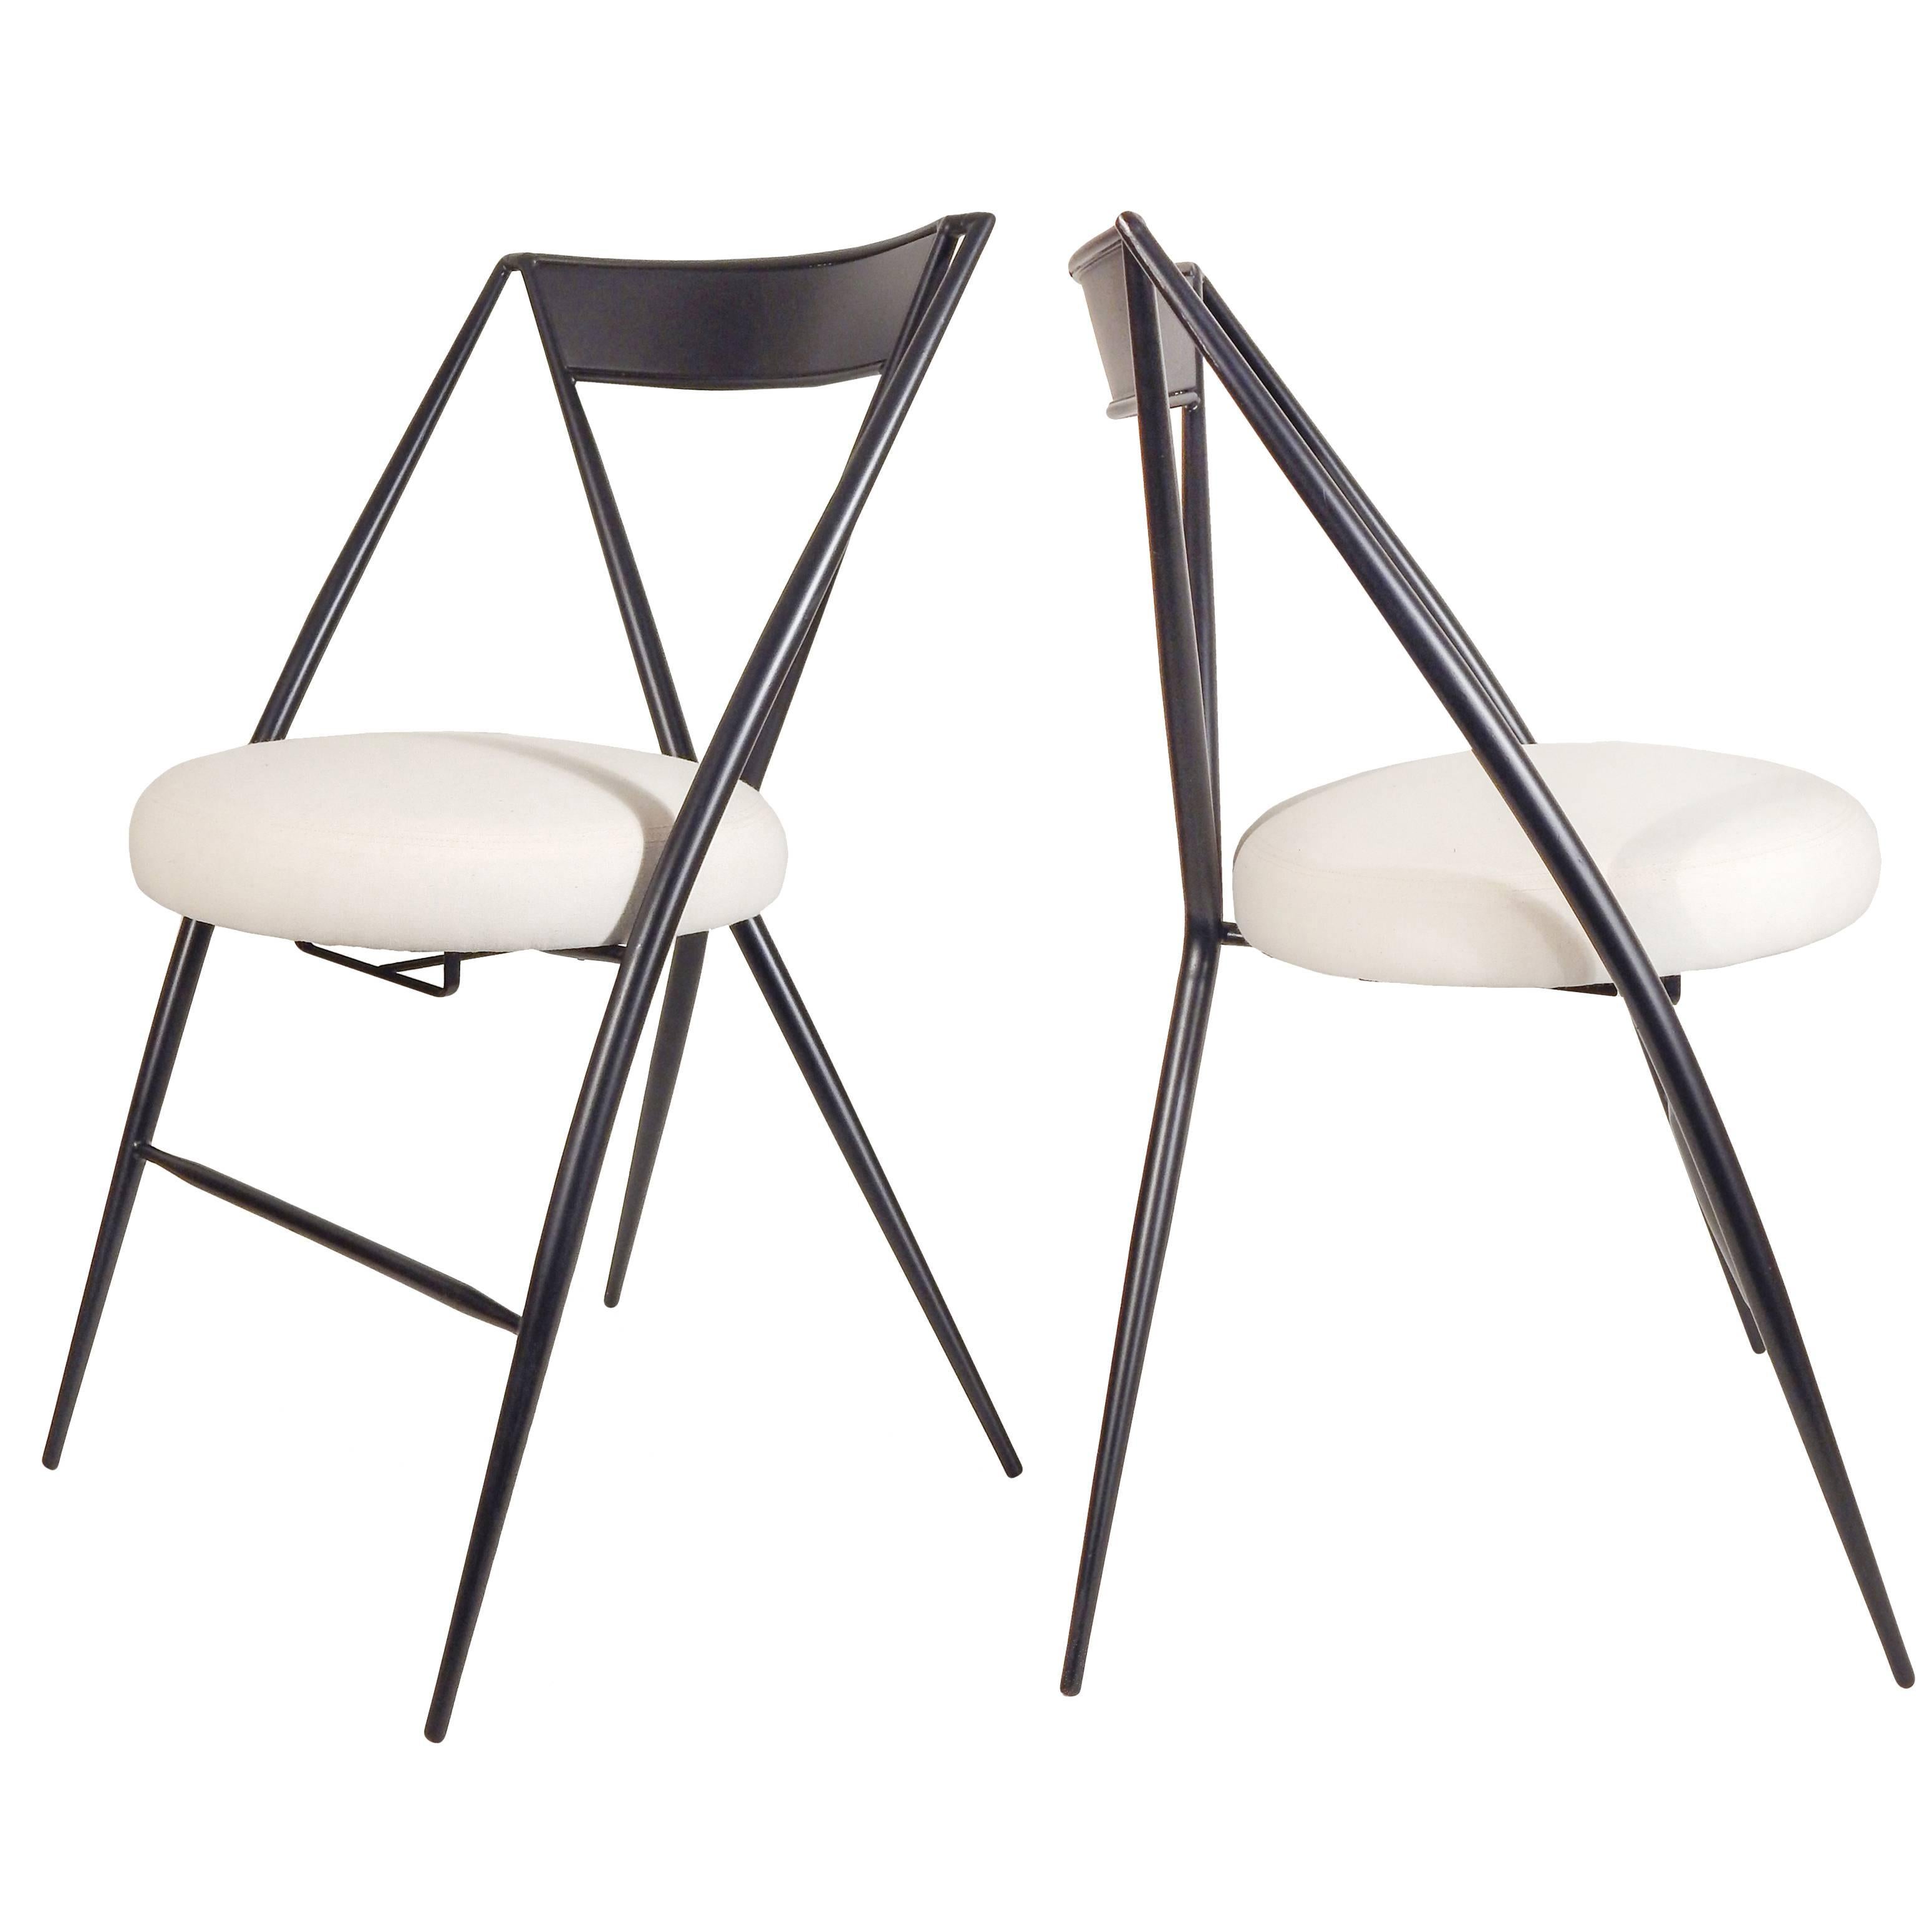 Pair of Mid-Century Modern Folding Chairs For Sale